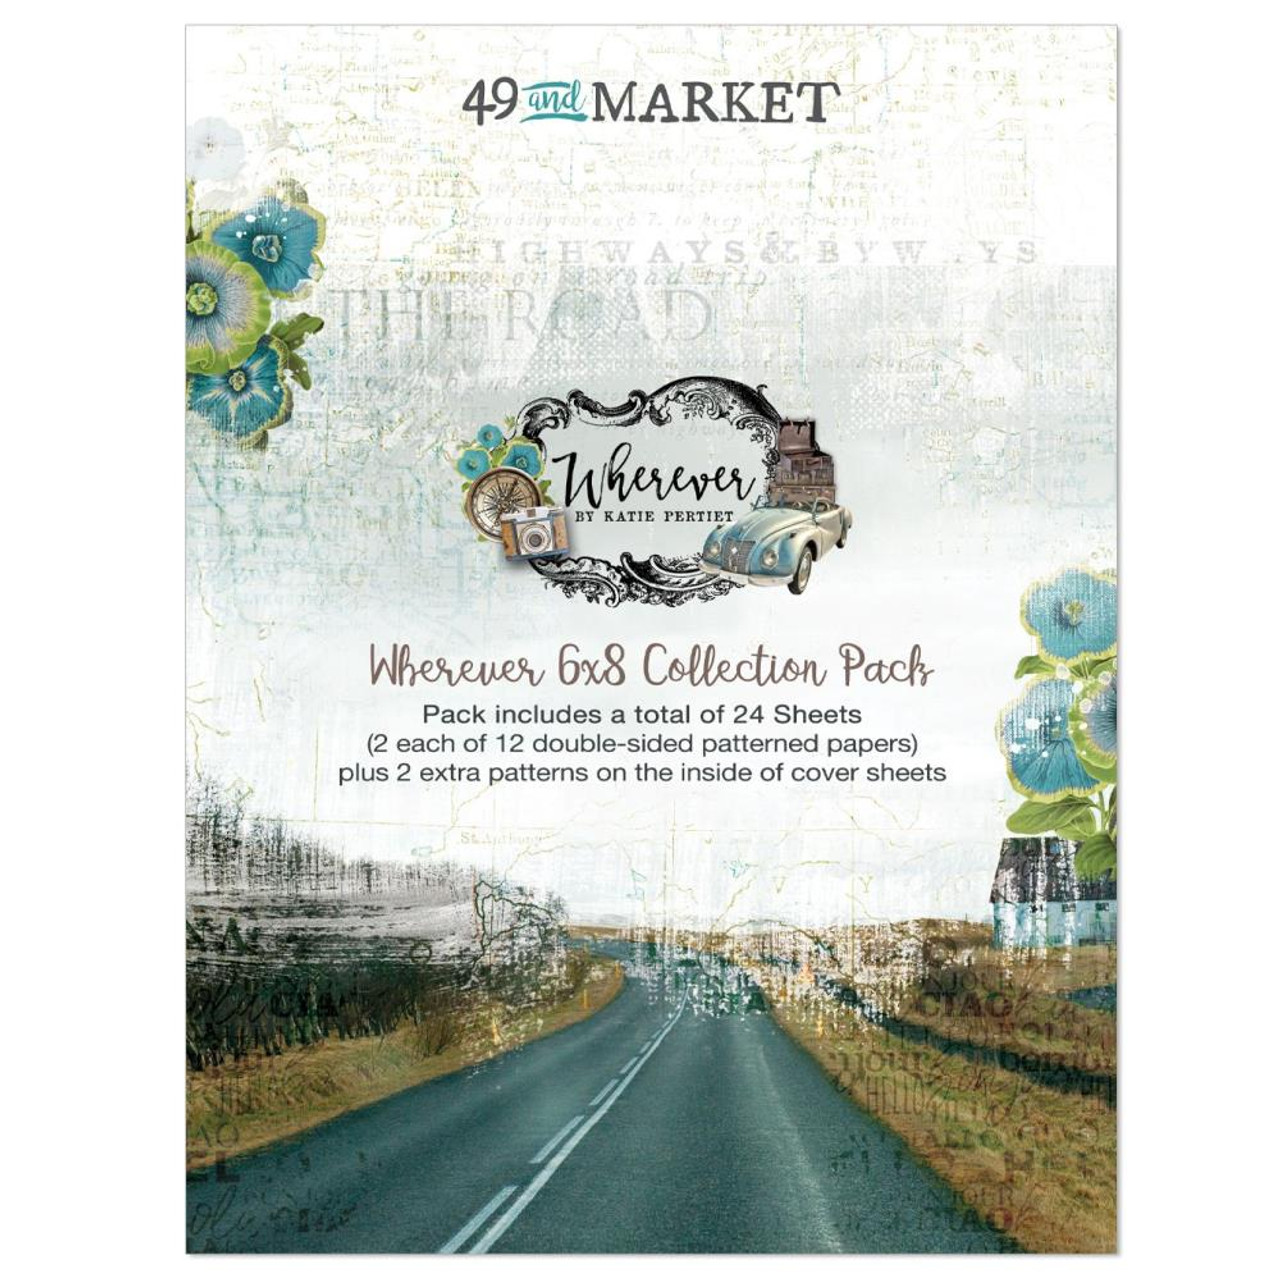 49 AND MARKET ARToptions 6x8 Collection Pack: Rouge